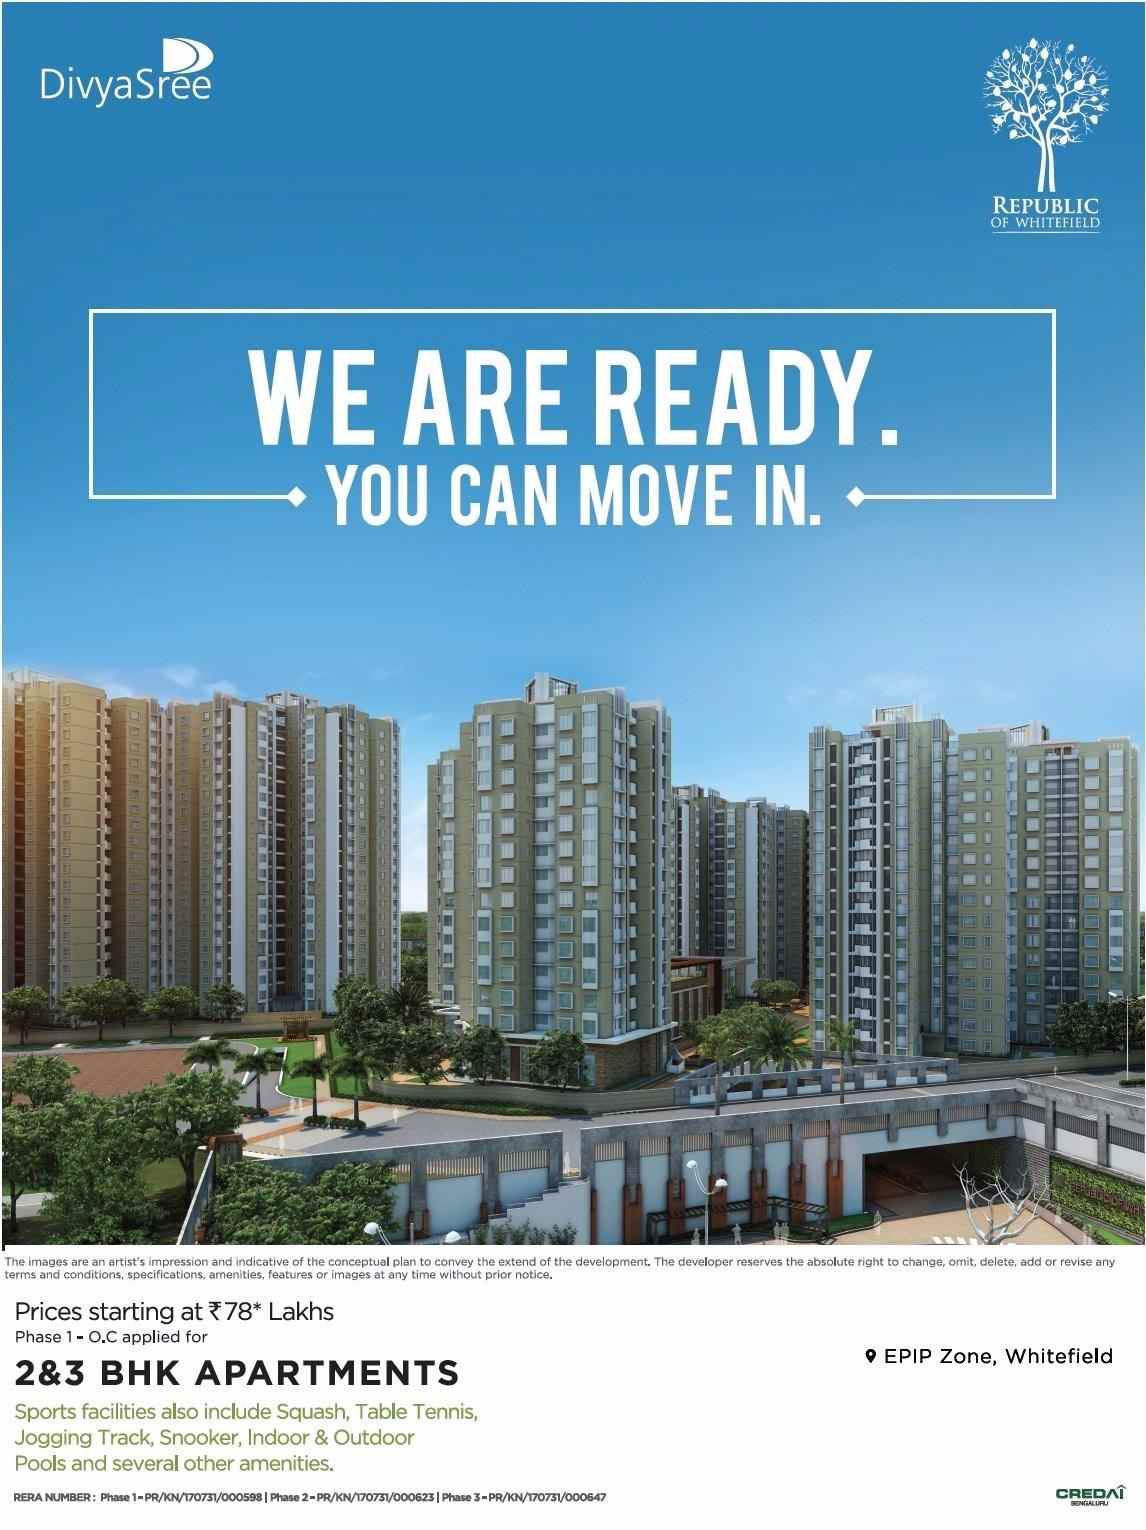 Divyasree Republic of Whitefield is now ready to move in Bangalore